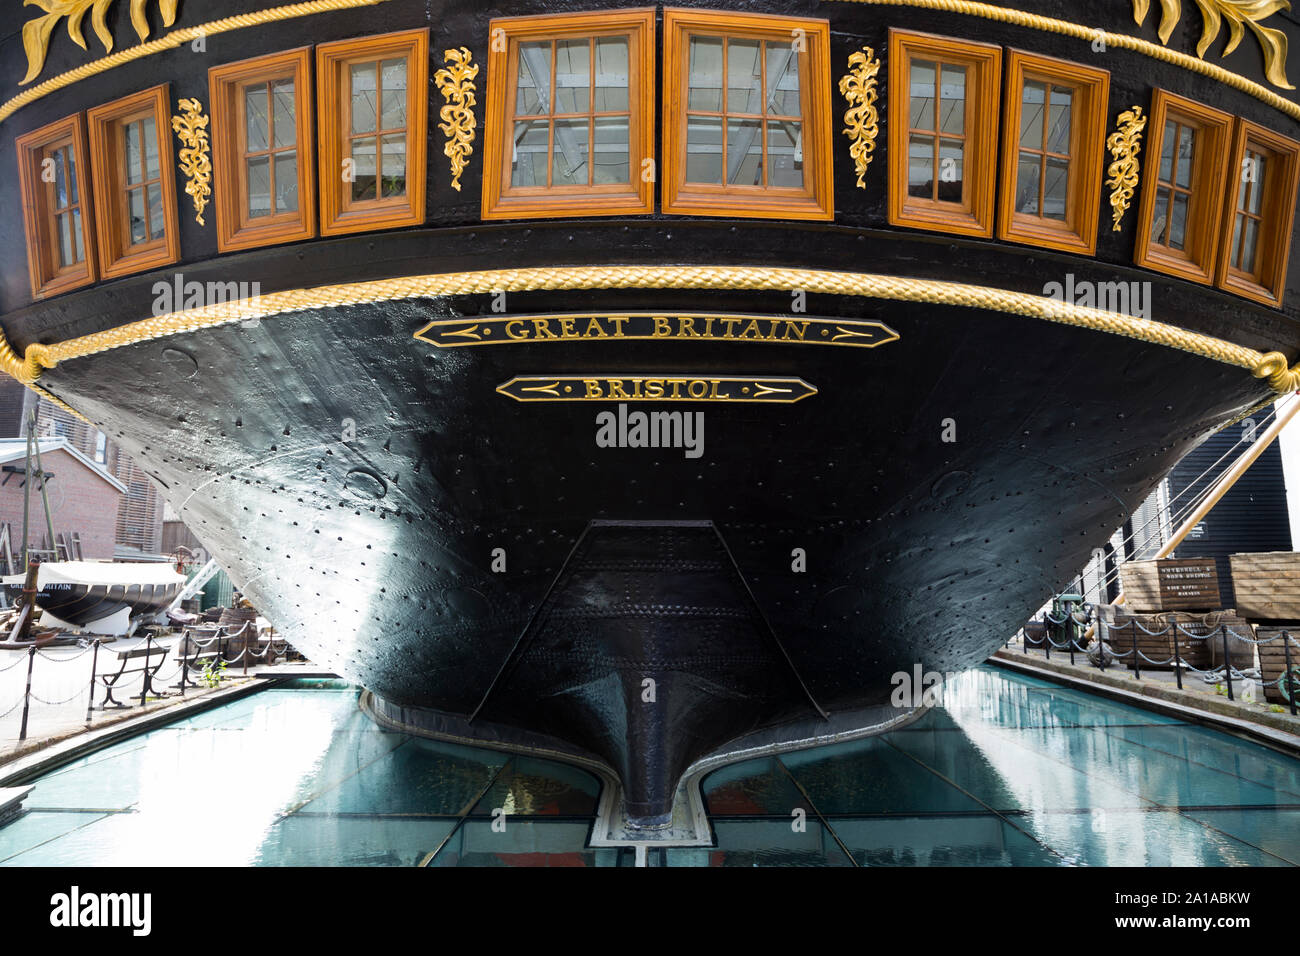 Stern / rear / back of the SS Great Britain, Isambard Kingdom Brunel 's iron ship, and the glass sea of the dry dock, Dockyard Museum in Bristol. UK. (109) Stock Photo